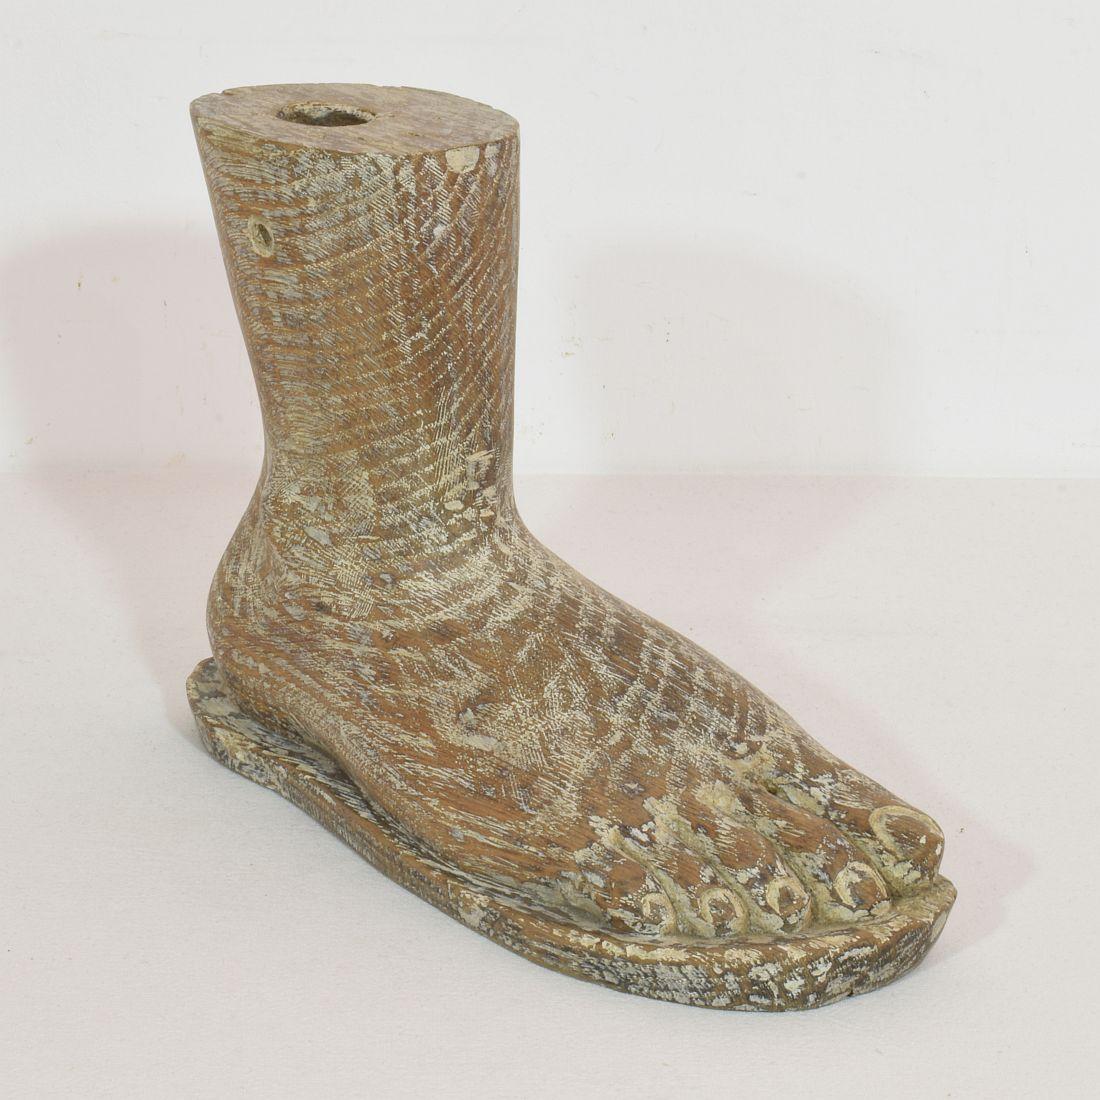 Baroque 17th / 18th Century Italian Wooden Foot of a Santos For Sale